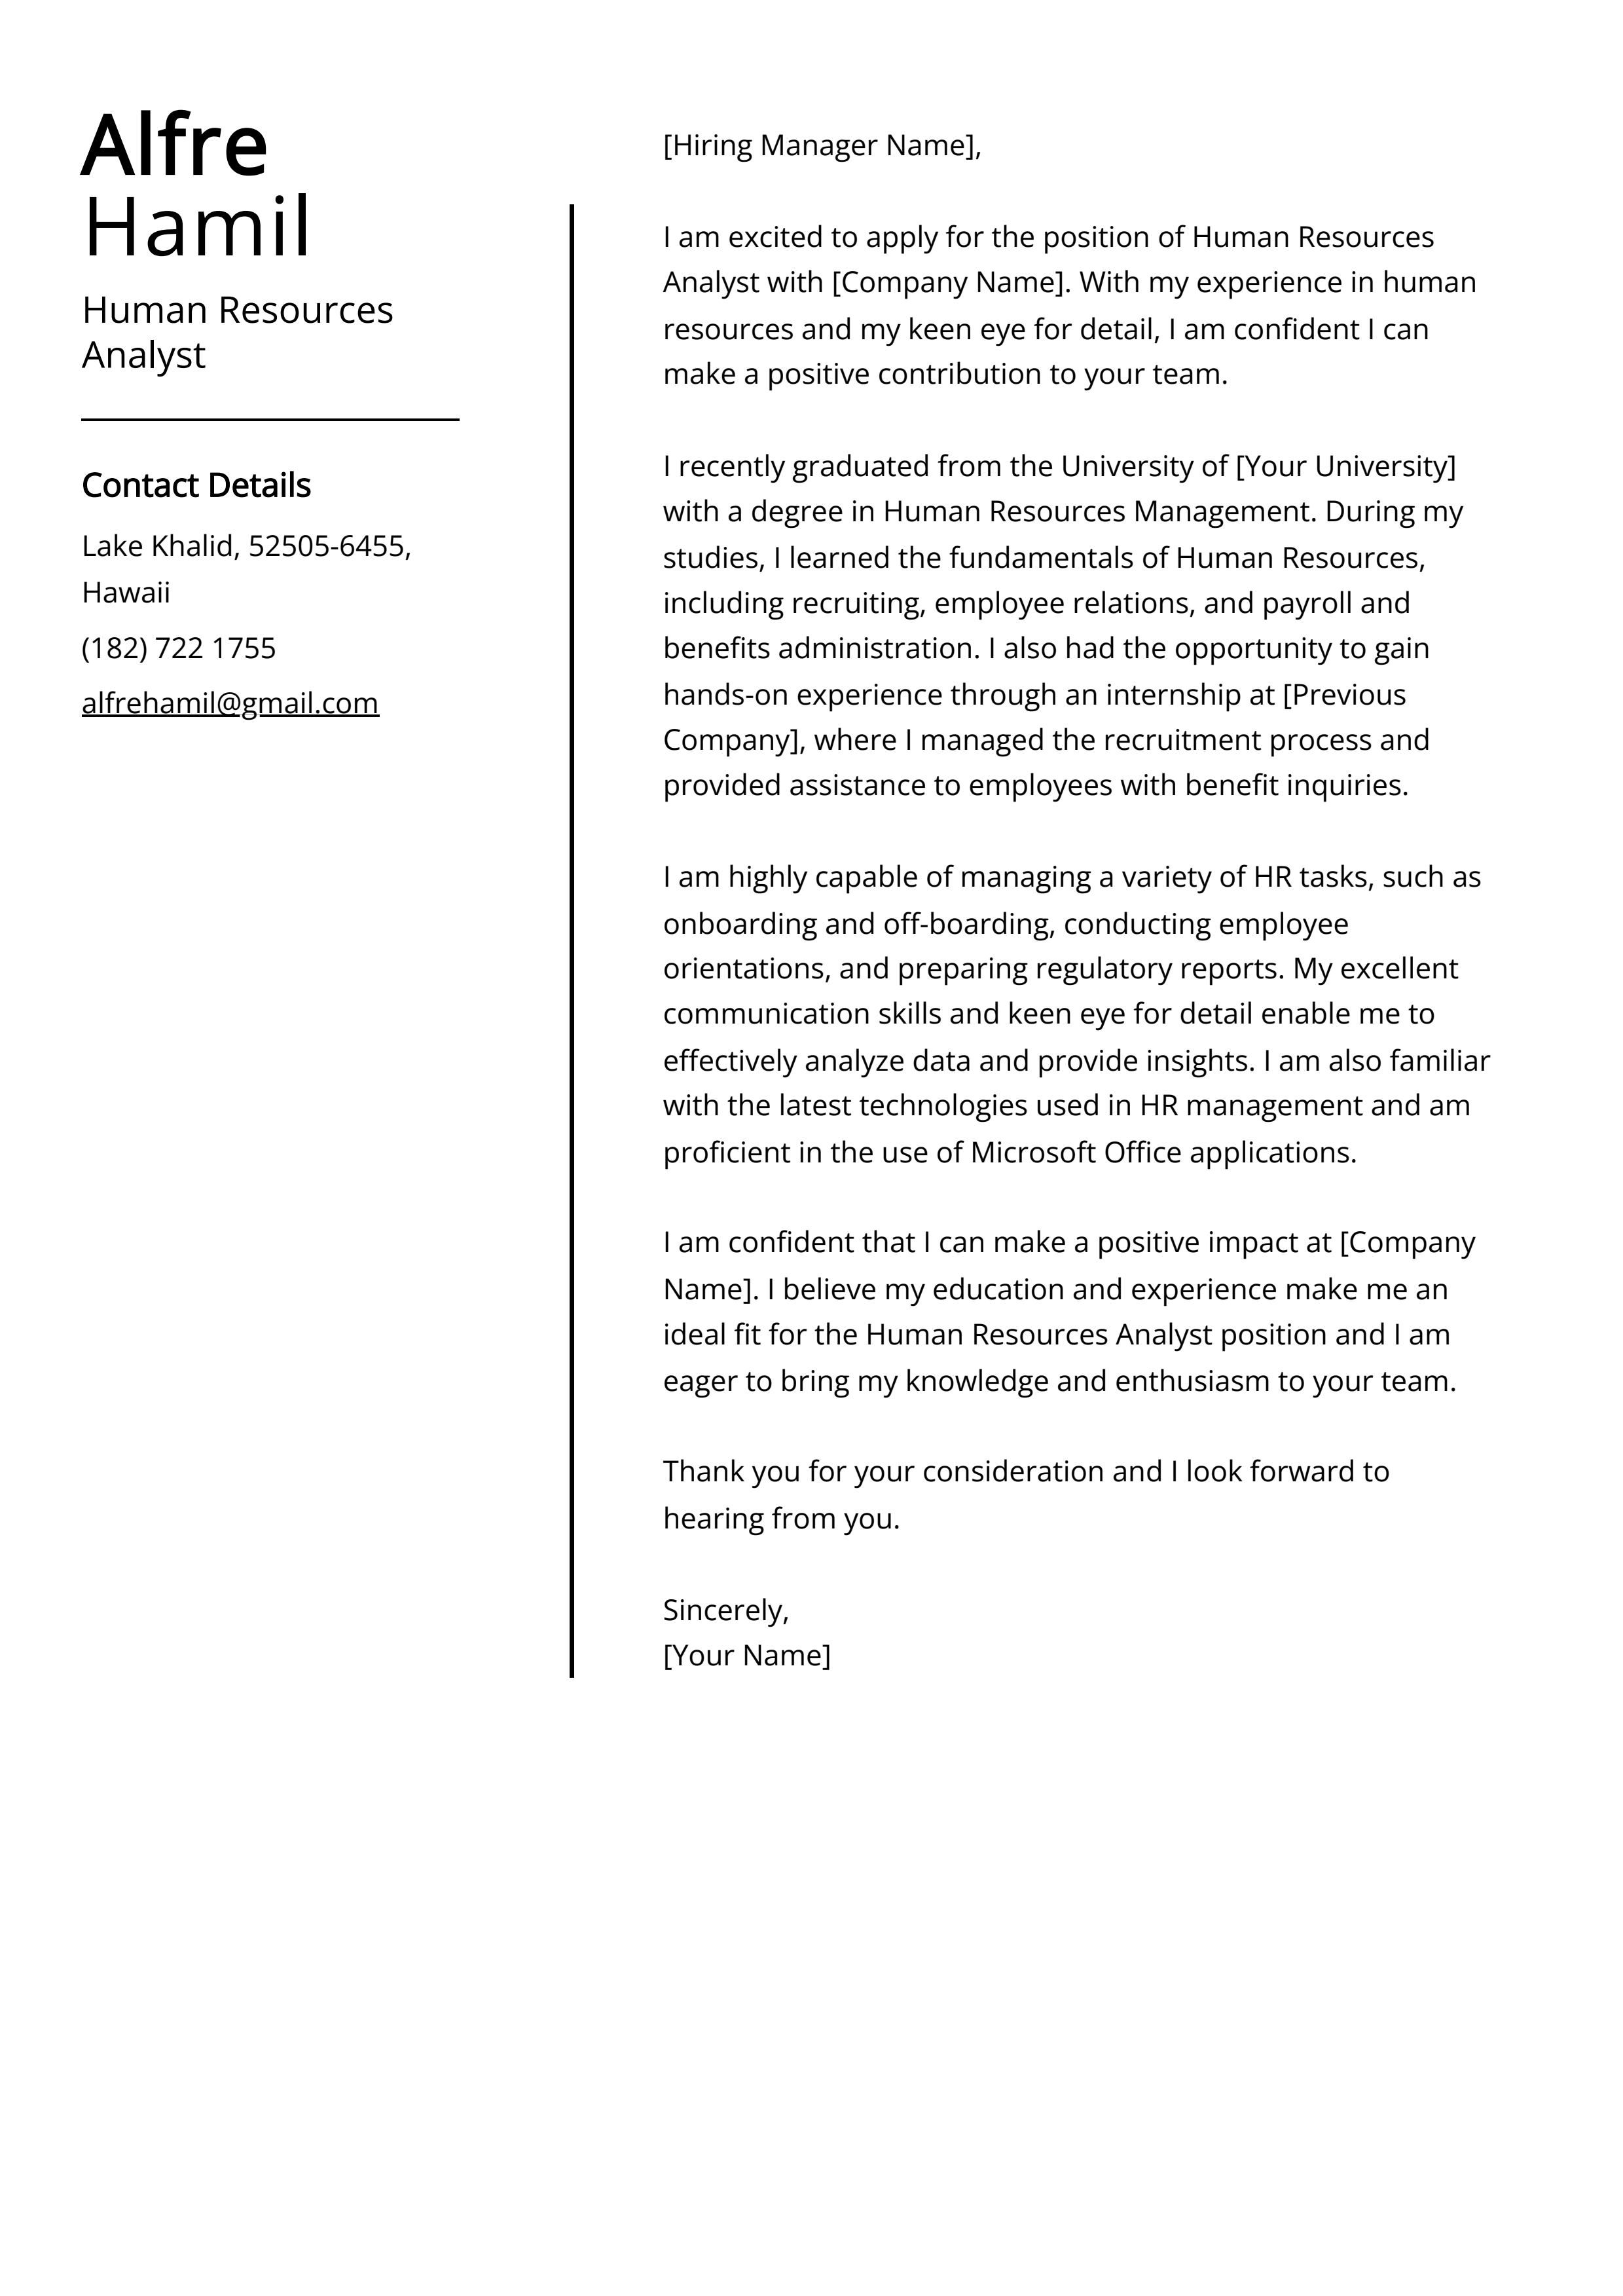 Human Resources Analyst Cover Letter Example